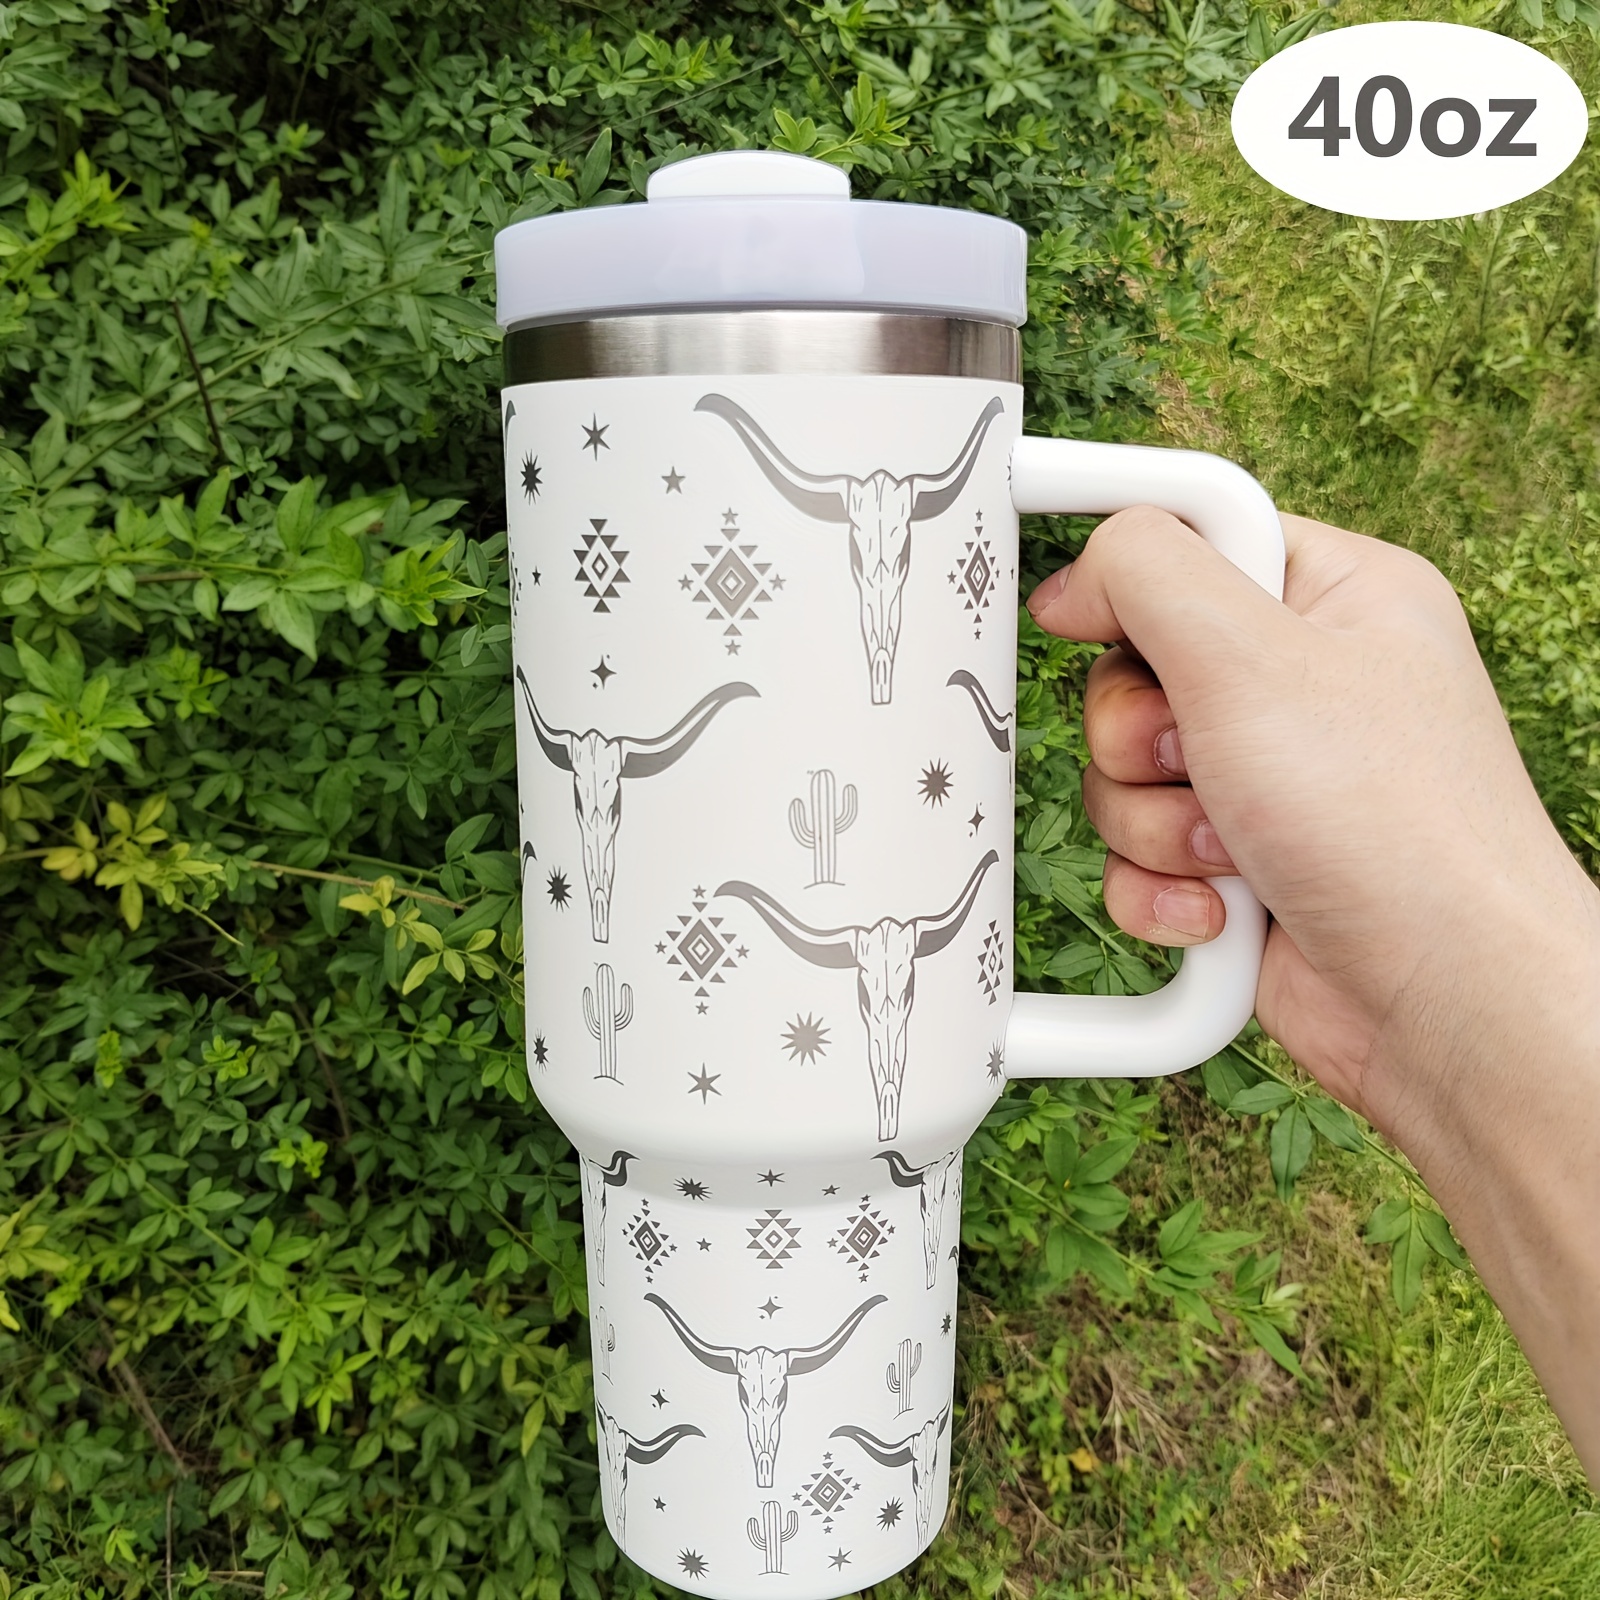 414ml/14oz Starbucks Stainless Steel Green Grey Outdoor Camping